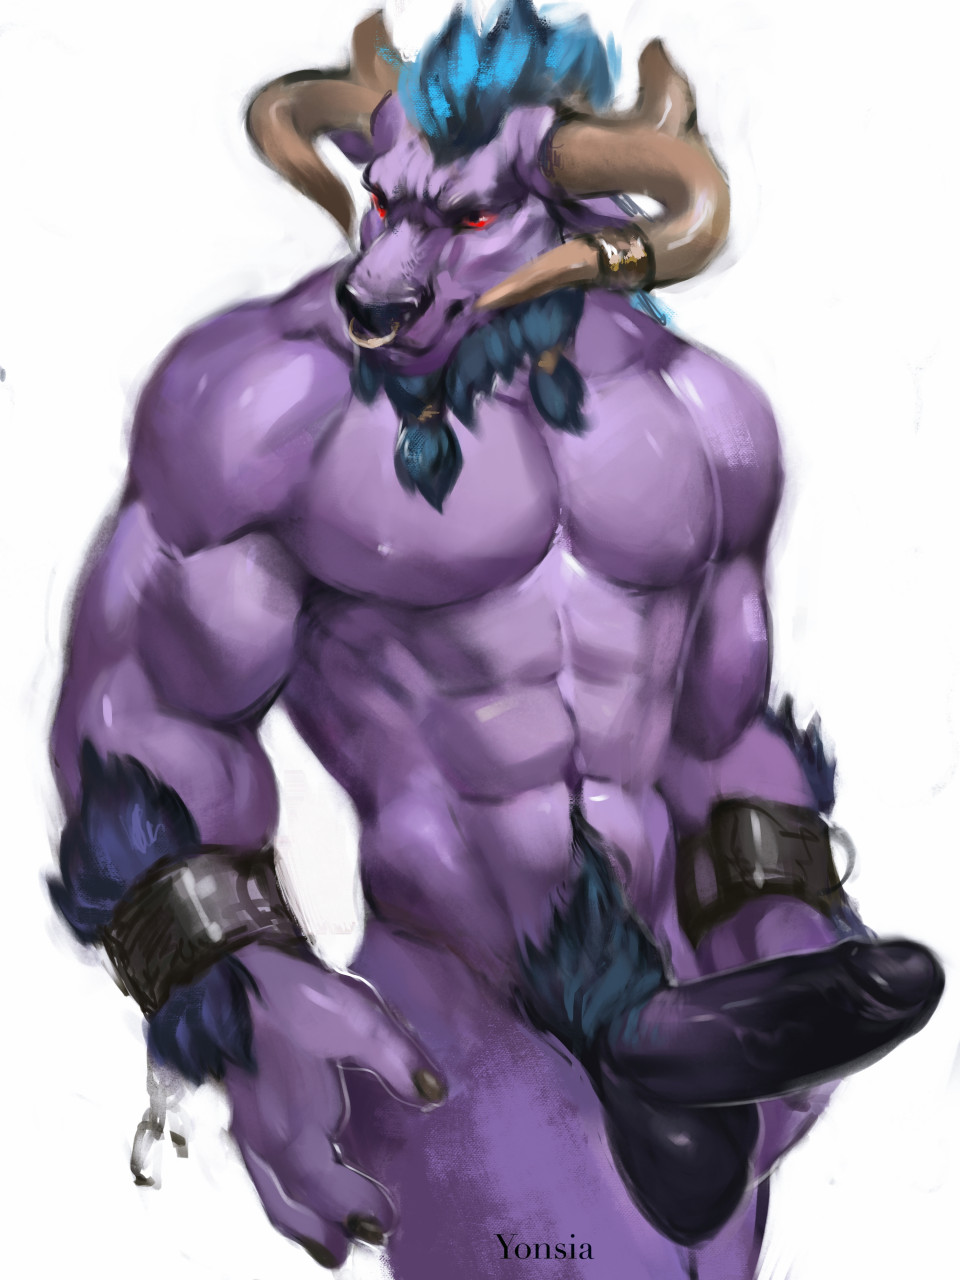 2022 2_horns 3:4 abs alistar_(lol) angry anthro areola balls beard belly biceps big_abs big_balls big_biceps big_brachioradialis big_deltoids big_flexor_carpi big_horn big_latissimus_dorsi big_muscles big_obliques big_pecs big_penis big_serratus big_trapezius big_triceps black_balls black_body black_flesh black_fur black_genitals black_glans black_mane black_nails black_nose black_penis black_text blue_beard blue_body blue_fur blue_highlights blue_mane blue_pubes bovid bovine brachioradialis broken_chain broken_restraints cattle chin_tuft closed_frown colored colored_nails cuff_(restraint) cuff_(restraint)_only dark_balls dark_beard dark_cuff_(restraint) dark_eyes dark_flesh dark_glans dark_nails dark_nose dark_penis dark_pubes dark_text deltoids digital_media_(artwork) digital_painting_(artwork) erection european_mythology facial_hair facial_piercing facial_tuft flexing_brachioradialis flexor_carpi front_view fur fur_tuft furrowed_brow genitals glans glare glistening glistening_arms glistening_balls glistening_beard glistening_belly glistening_body glistening_chest glistening_cuff_(restraint) glistening_eyes glistening_face glistening_fingers glistening_fur glistening_genitalia glistening_glans glistening_hands glistening_horn glistening_jewelry glistening_metal glistening_nails glistening_nipples glistening_nose glistening_nose_piercing glistening_nose_ring glistening_penis glistening_piercing glistening_ring gold_(metal) gold_jewelry gold_nose_piercing gold_nose_ring gold_piercing gold_ring gradient_penis greek_mythology head_horn head_tuft hi_res highlights_(coloring) horn horn_jewelry horn_ring huge_abs huge_deltoids humanoid_genitalia humanoid_hands humanoid_penis jewelry jewelry_only latissimus_dorsi league_of_legends legs_together light light_areola light_arms light_belly light_body light_chest light_face light_fingers light_flesh light_fur light_hands light_horn light_jewelry light_legs light_mane light_neck light_nipples light_nose_piercing light_nose_ring light_piercing light_ring lighting looking_away male male_anthro mammal mane manly mature_anthro mature_male metal minotaur monotone_areola monotone_arms monotone_balls monotone_belly monotone_chest monotone_cuff_(restraint) monotone_face monotone_fingers monotone_genitals monotone_glans monotone_hands monotone_horn monotone_jewelry monotone_legs monotone_nails monotone_neck monotone_nipples monotone_nose monotone_nose_piercing monotone_nose_ring monotone_piercing monotone_pubes monotone_ring mostly_nude_anthro mostly_nude_male multicolored_body multicolored_fur multicolored_mane multicolored_penis muscular muscular_anthro muscular_male mythology nails navel nipples no_sclera nose_piercing nose_ring obliques pecs penis piercing portrait pubes purple_areola purple_arms purple_belly purple_body purple_chest purple_face purple_fingers purple_flesh purple_fur purple_genitals purple_hands purple_legs purple_neck purple_nipples purple_penis red_eyes restraints ring ring_(jewelry) ring_piercing riot_games serratus shaded signature simple_background solo standing tan_horn text thick_penis three-quarter_portrait trapezius triceps tuft two_tone_flesh two_tone_genitals two_tone_mane two_tone_penis v-cut vein veiny_penis video_games white_background white_light wristwear wristwear_only yonsia